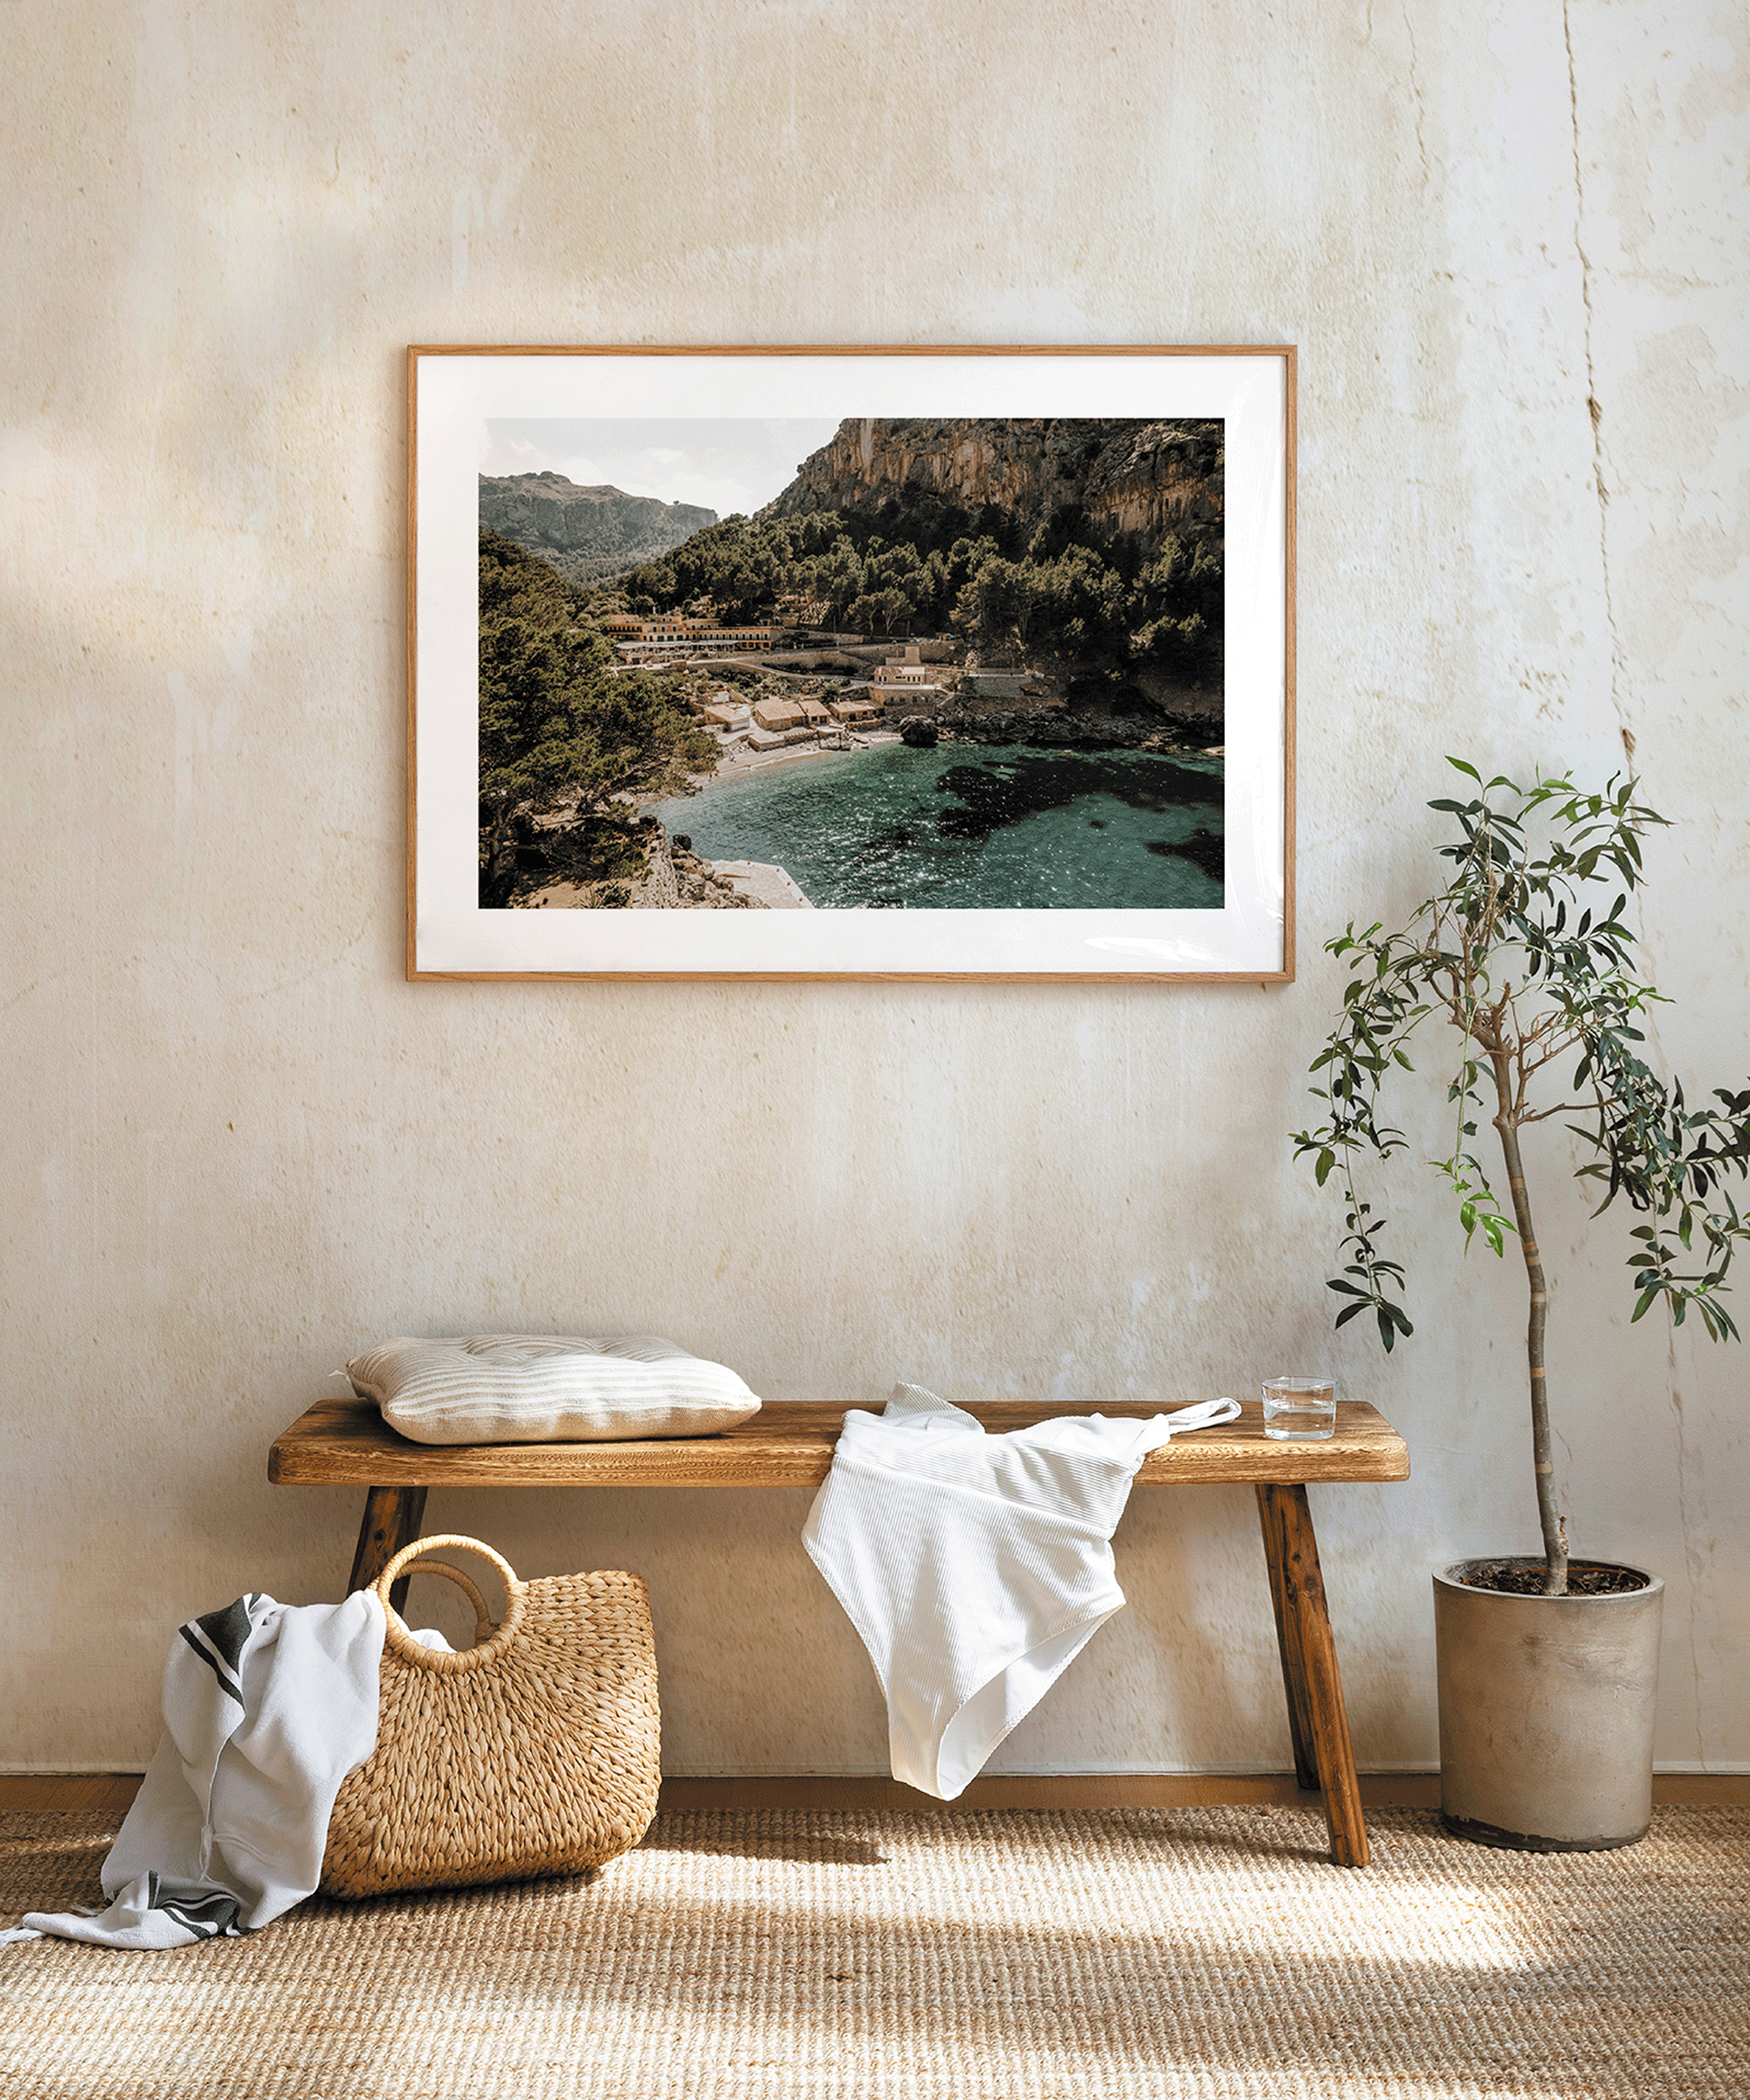 print of a nature scene along with a wooden side table and indoor tree